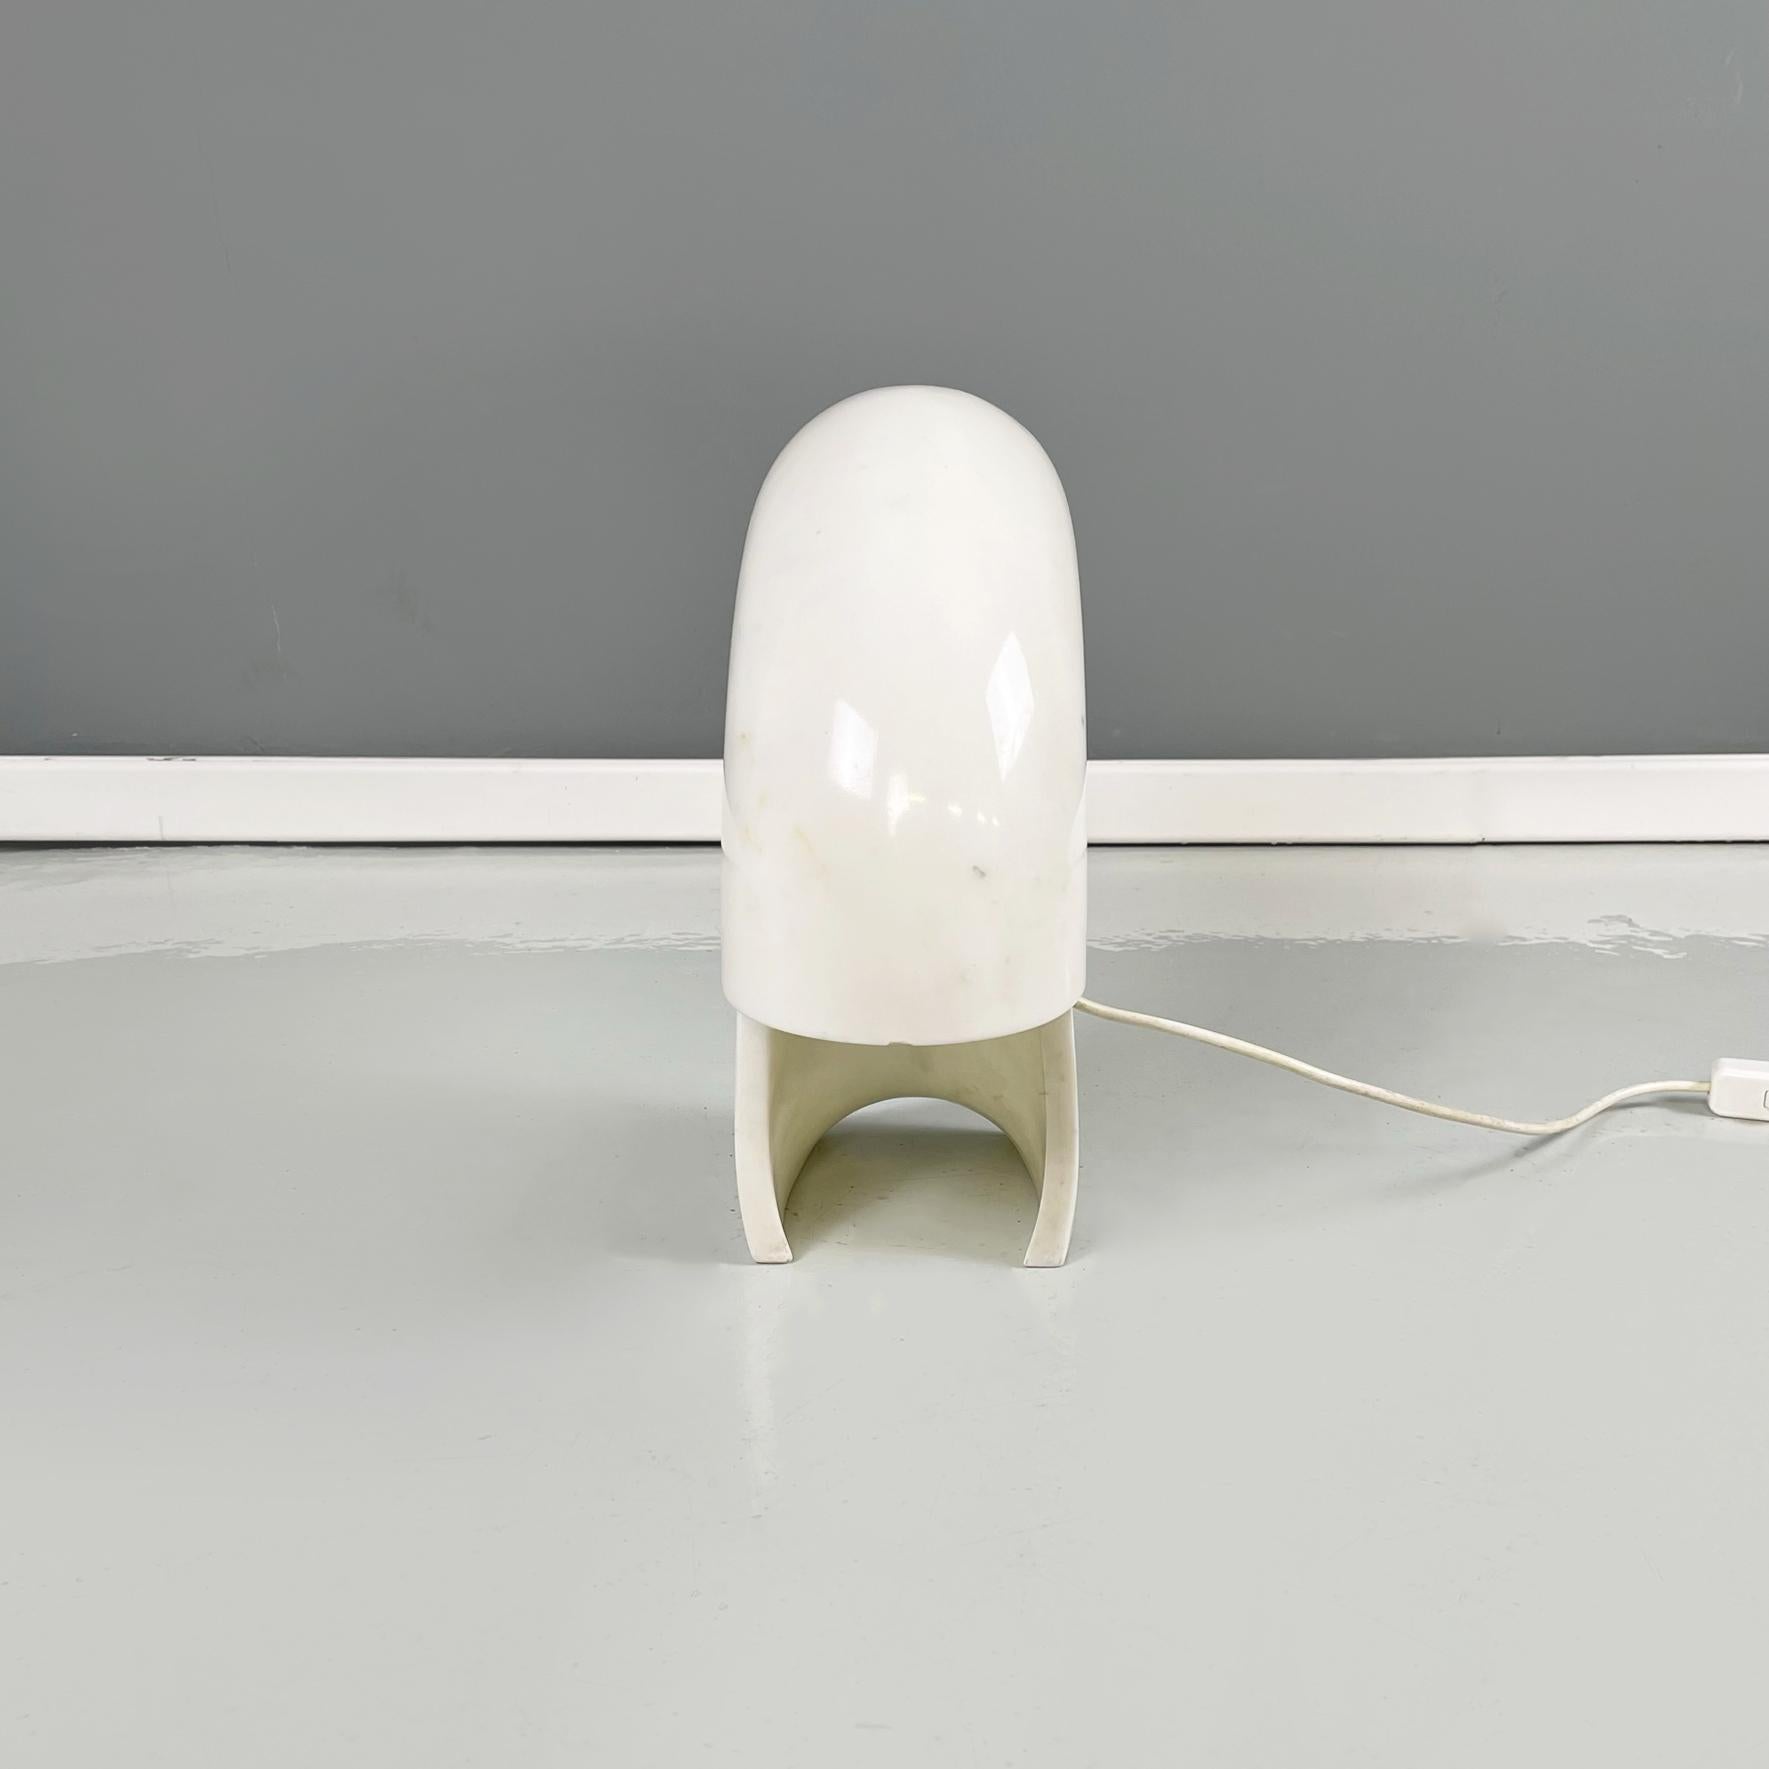 Late 20th Century Italian Modern Carrara Marble Table Lamp Biagio by Tobia Scarpa for Flos, 1970s For Sale